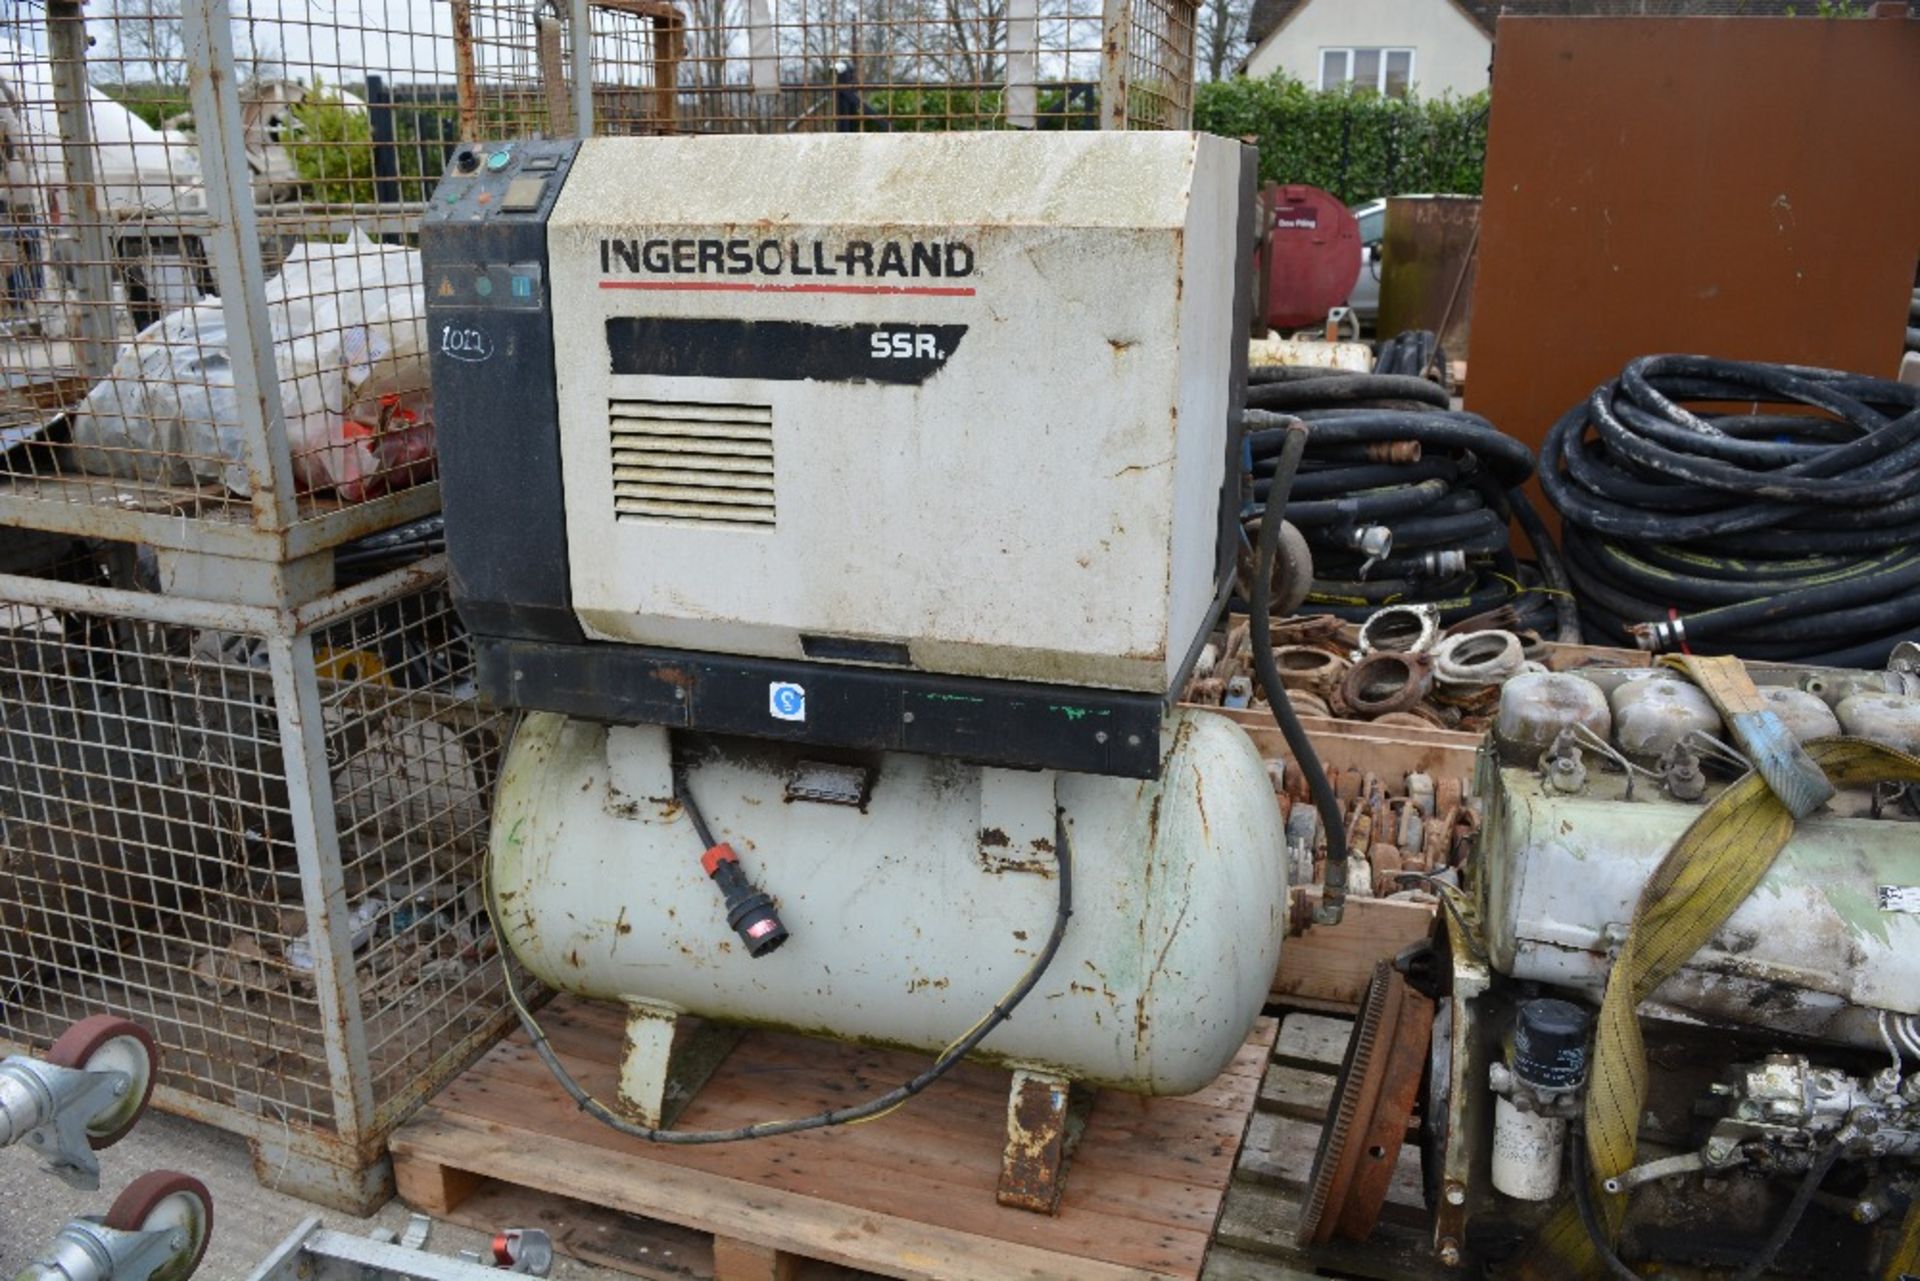 INGERSOLL RAND ML7.5 415V WORKSHOP COMPRESSOR (YEAR 2001), C/W 272L AIR TANK, *WORKING WHEN REMOVED,